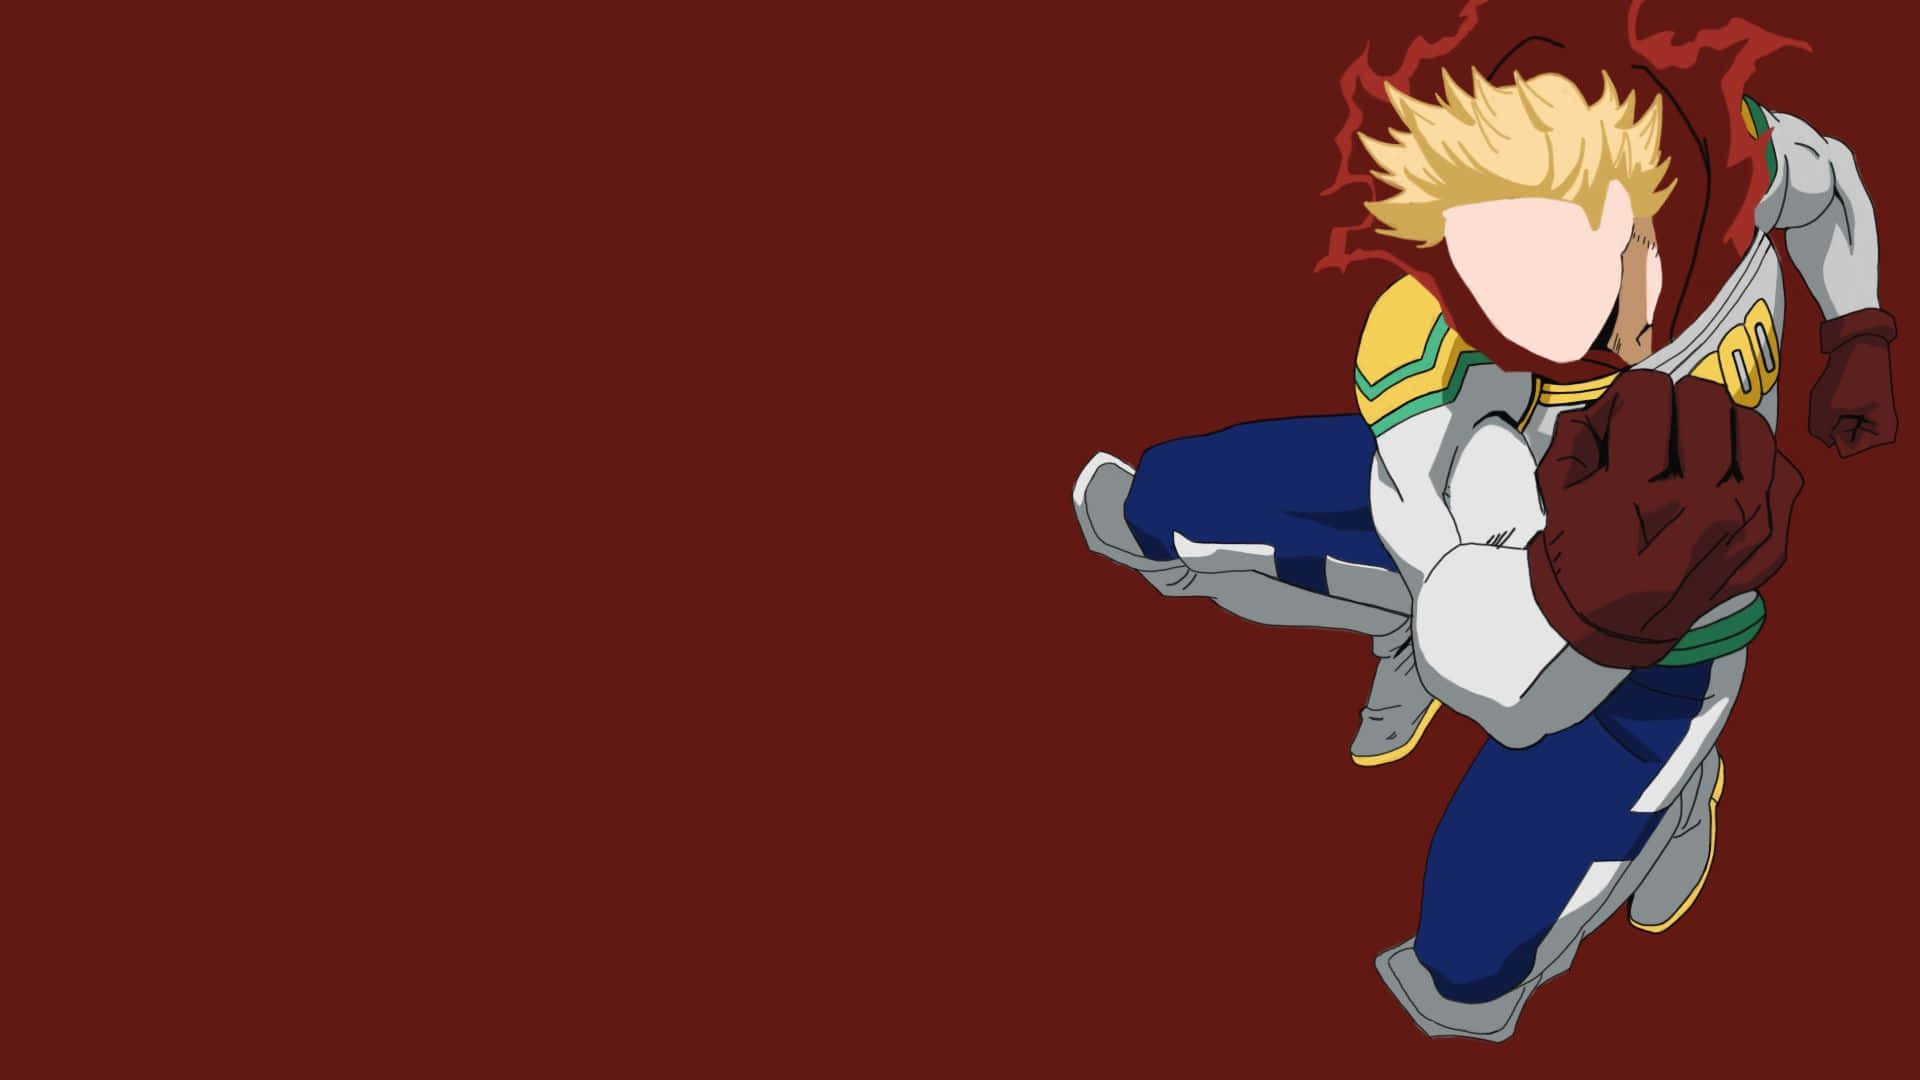 All Might's protege Mirio Togata, ready for action!" Wallpaper